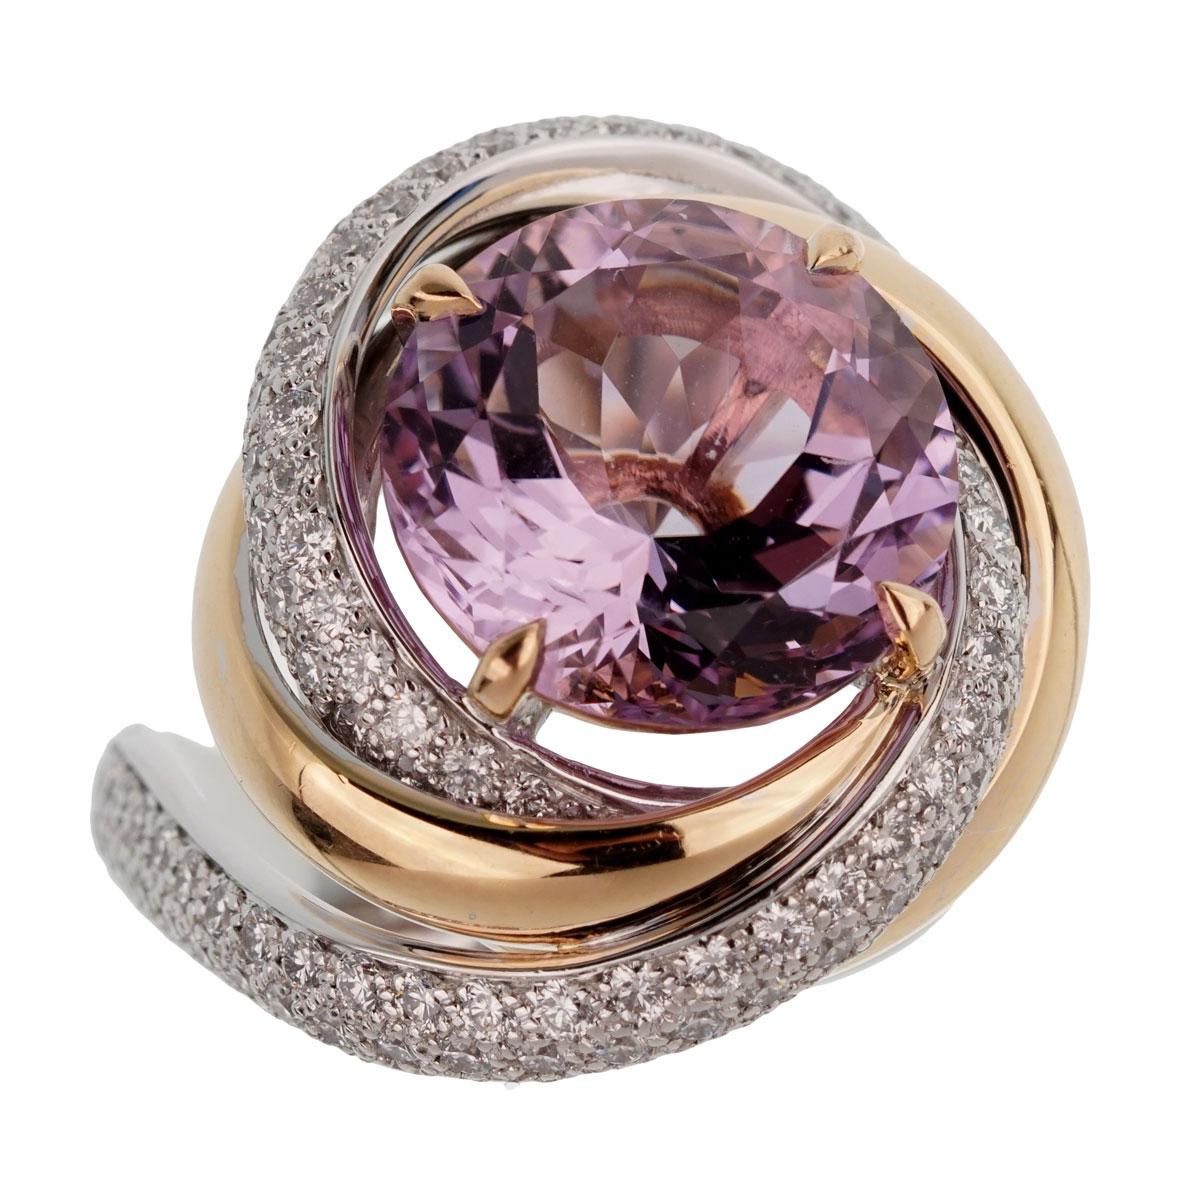 A magnificent Cartier Trinity Ruban Amethyst ring adorned with the finest round brilliant Cartier diamonds draping an amethyst.

Cartier Size 55 / US 6, and can be resized